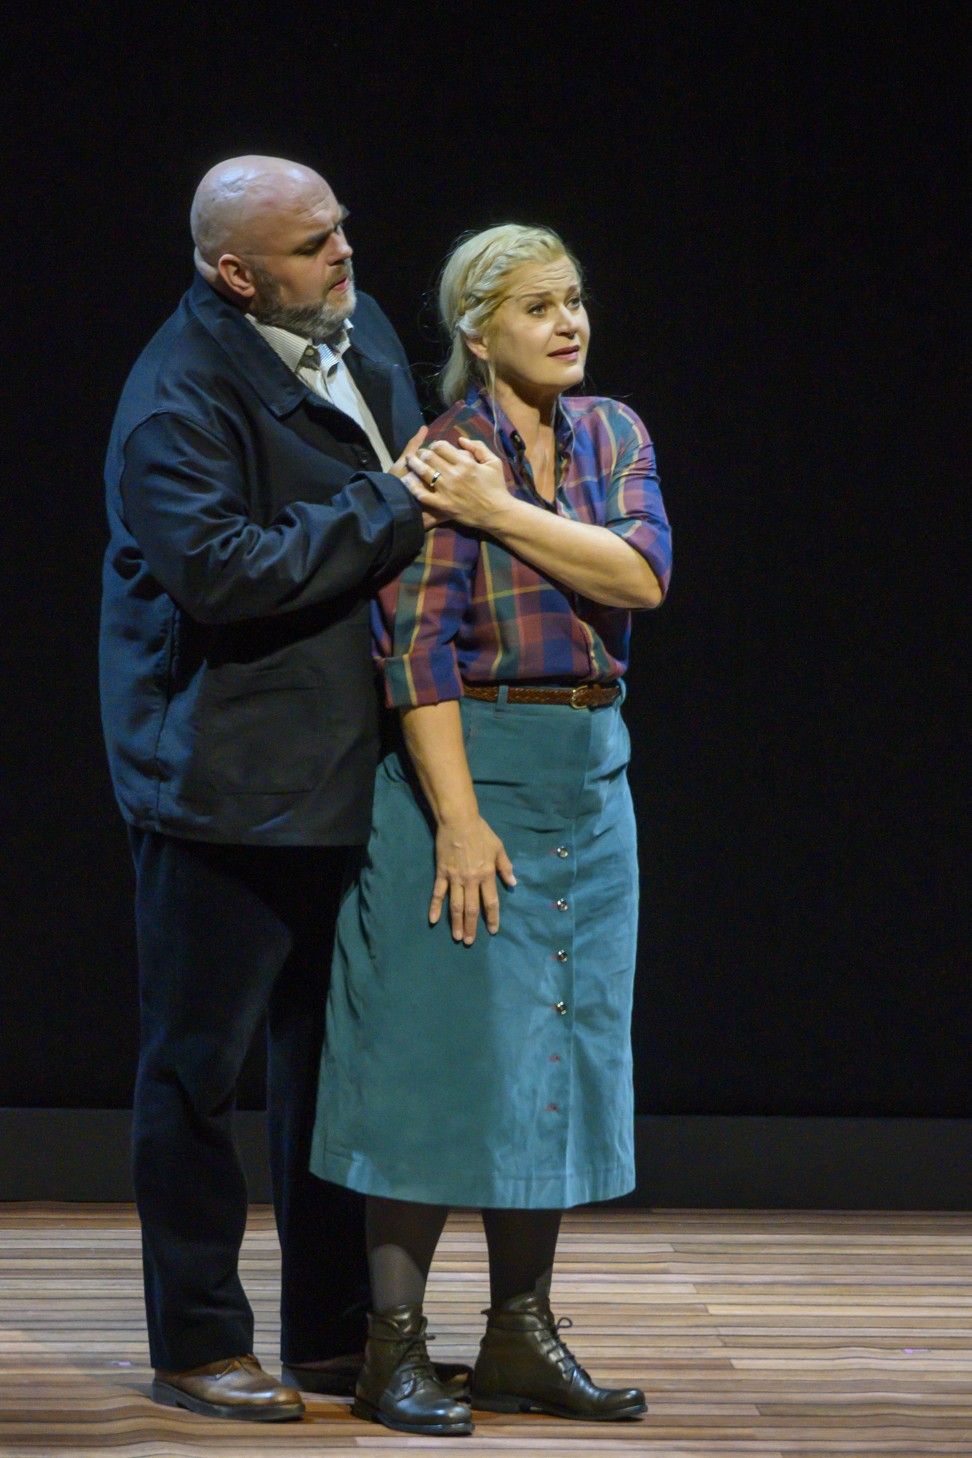 Fredrik Zetterstrom (left) and Sunnegardh in Autumn Sonata. Photo: Leisure and Cultural Services Department